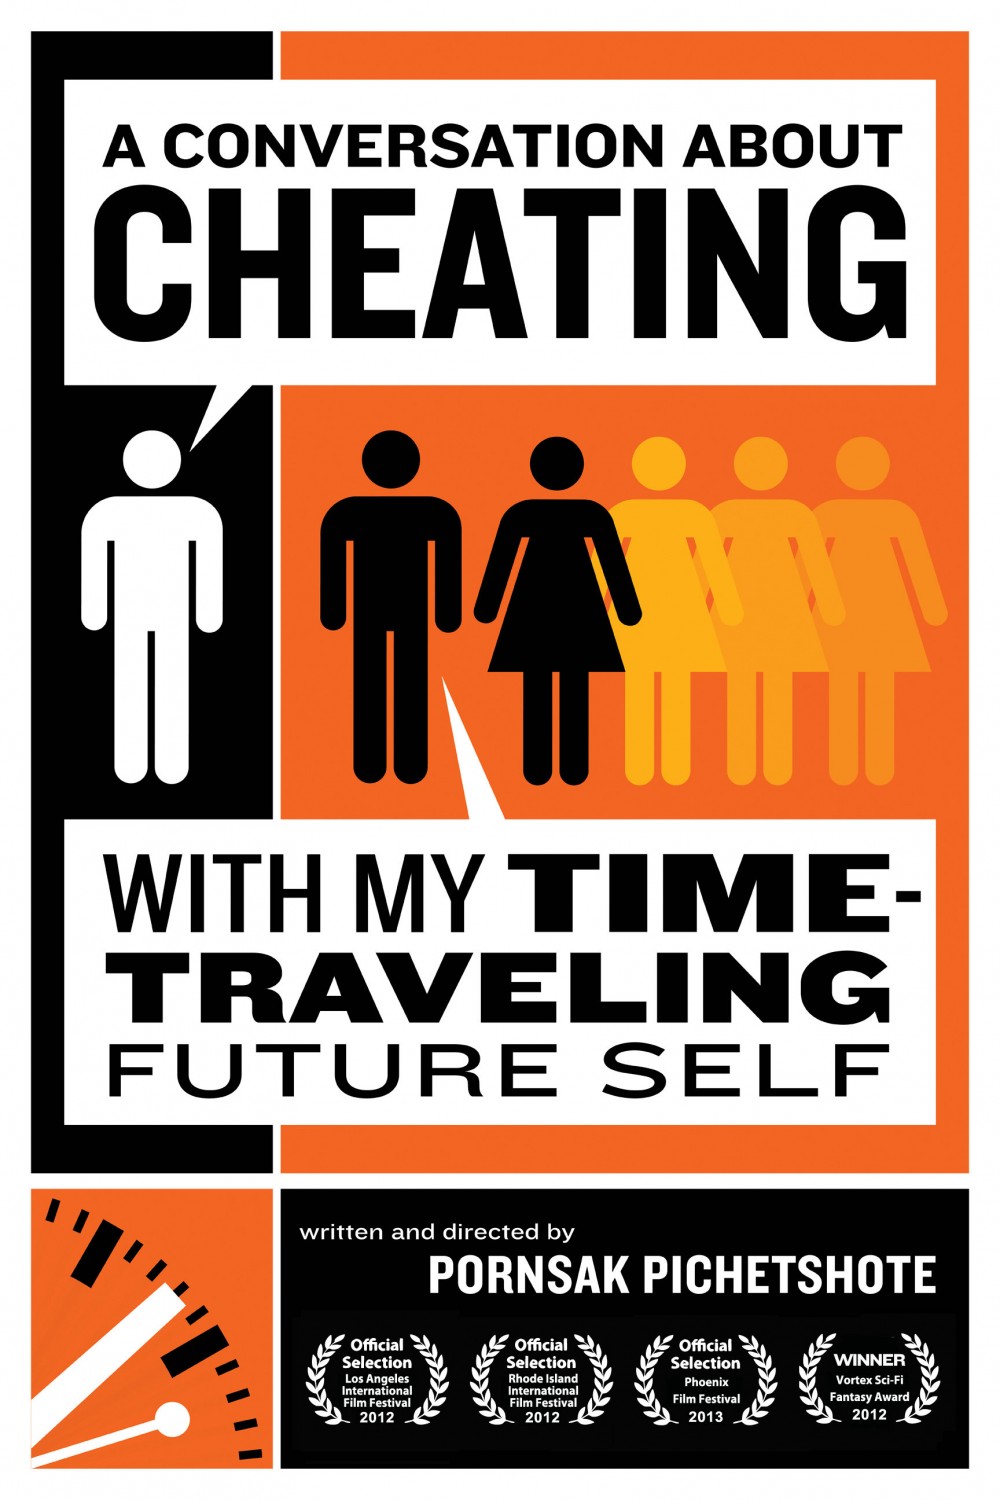 Extra Large Movie Poster Image for A Conversation About Cheating with My Time Travelling Future Self